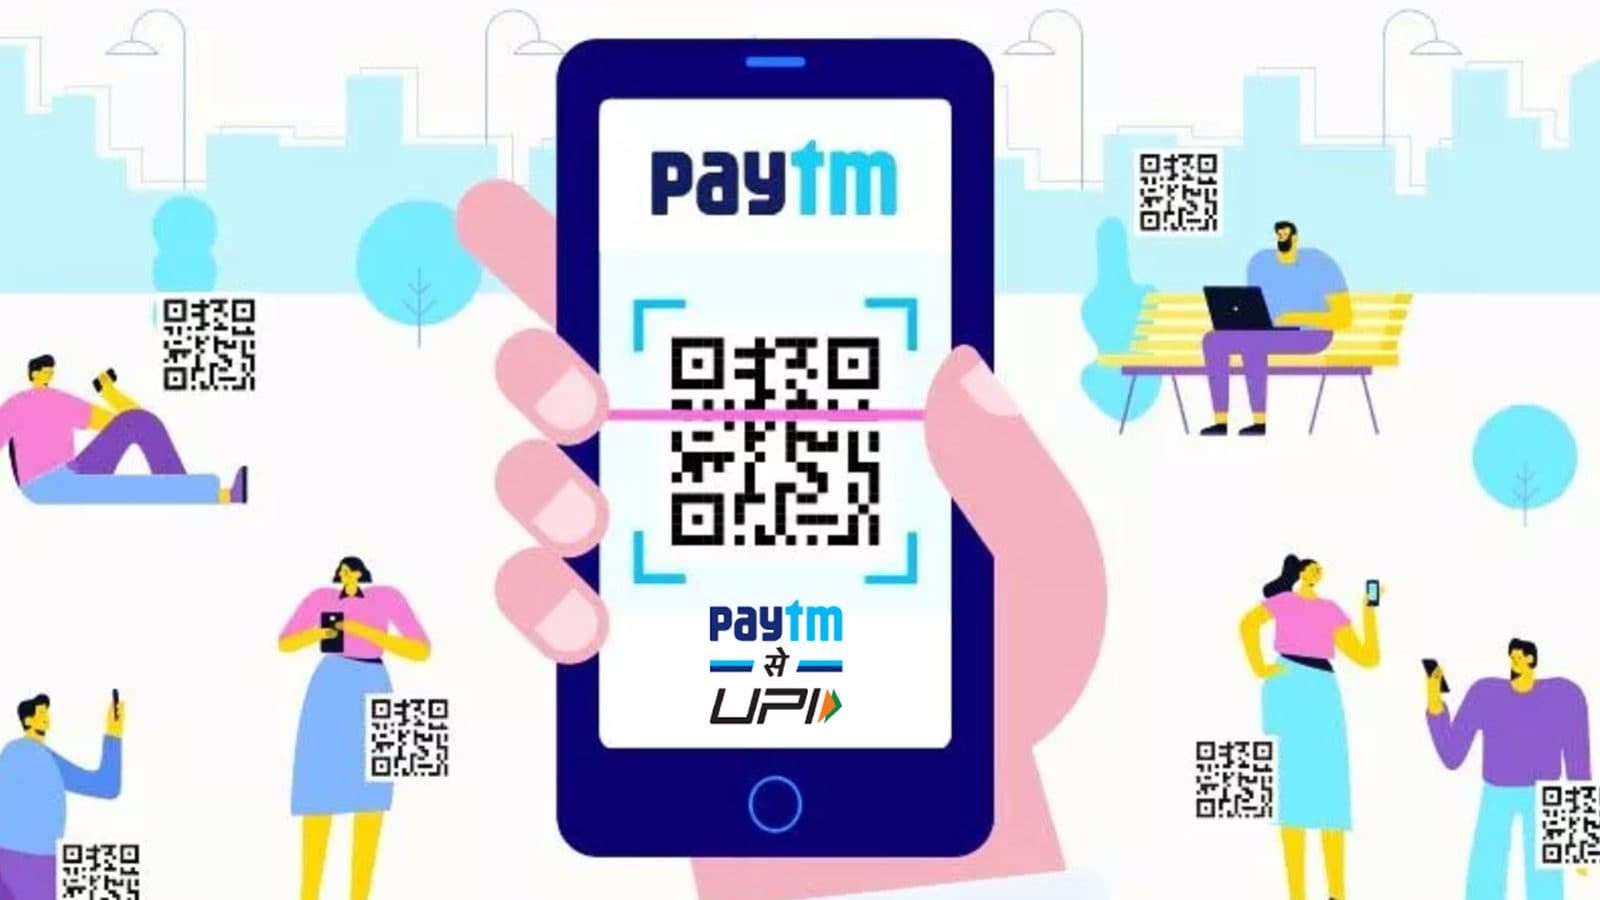 Paytm Investors Seem Not in a Hurry to Sell: Analysts